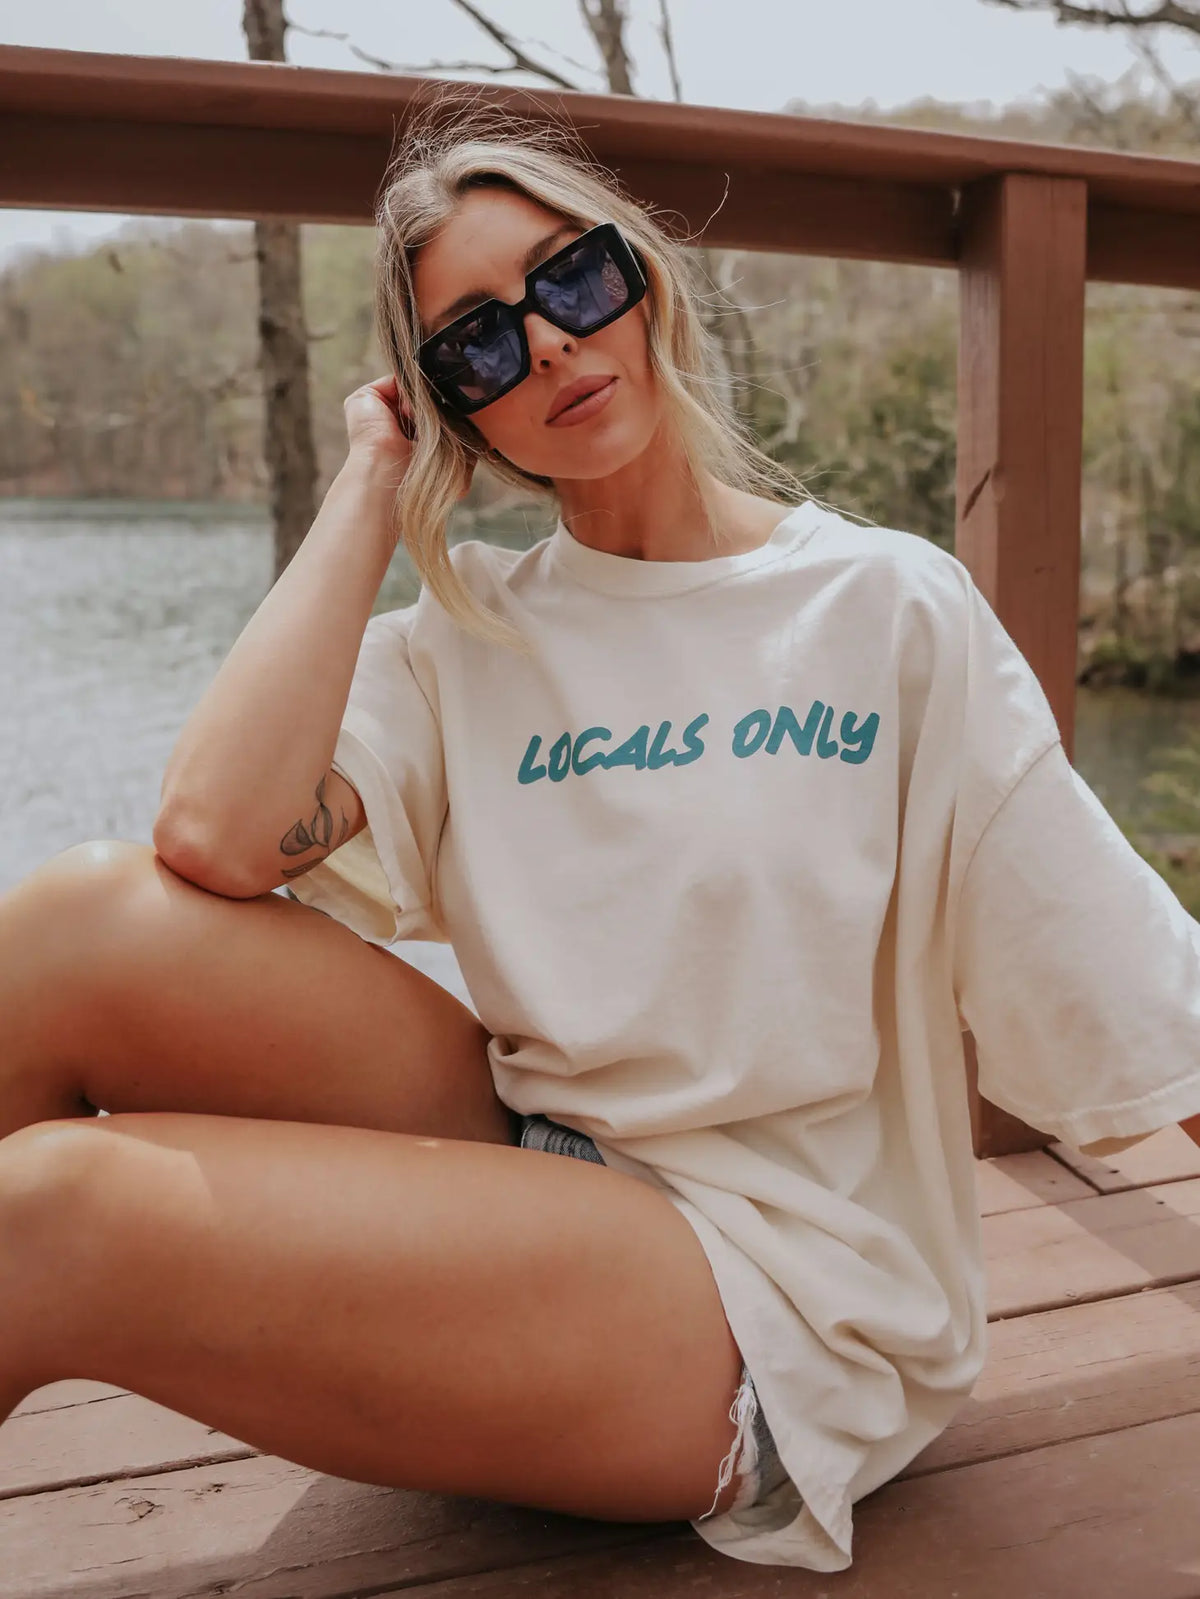 Locals Only Tee - KC Outfitter